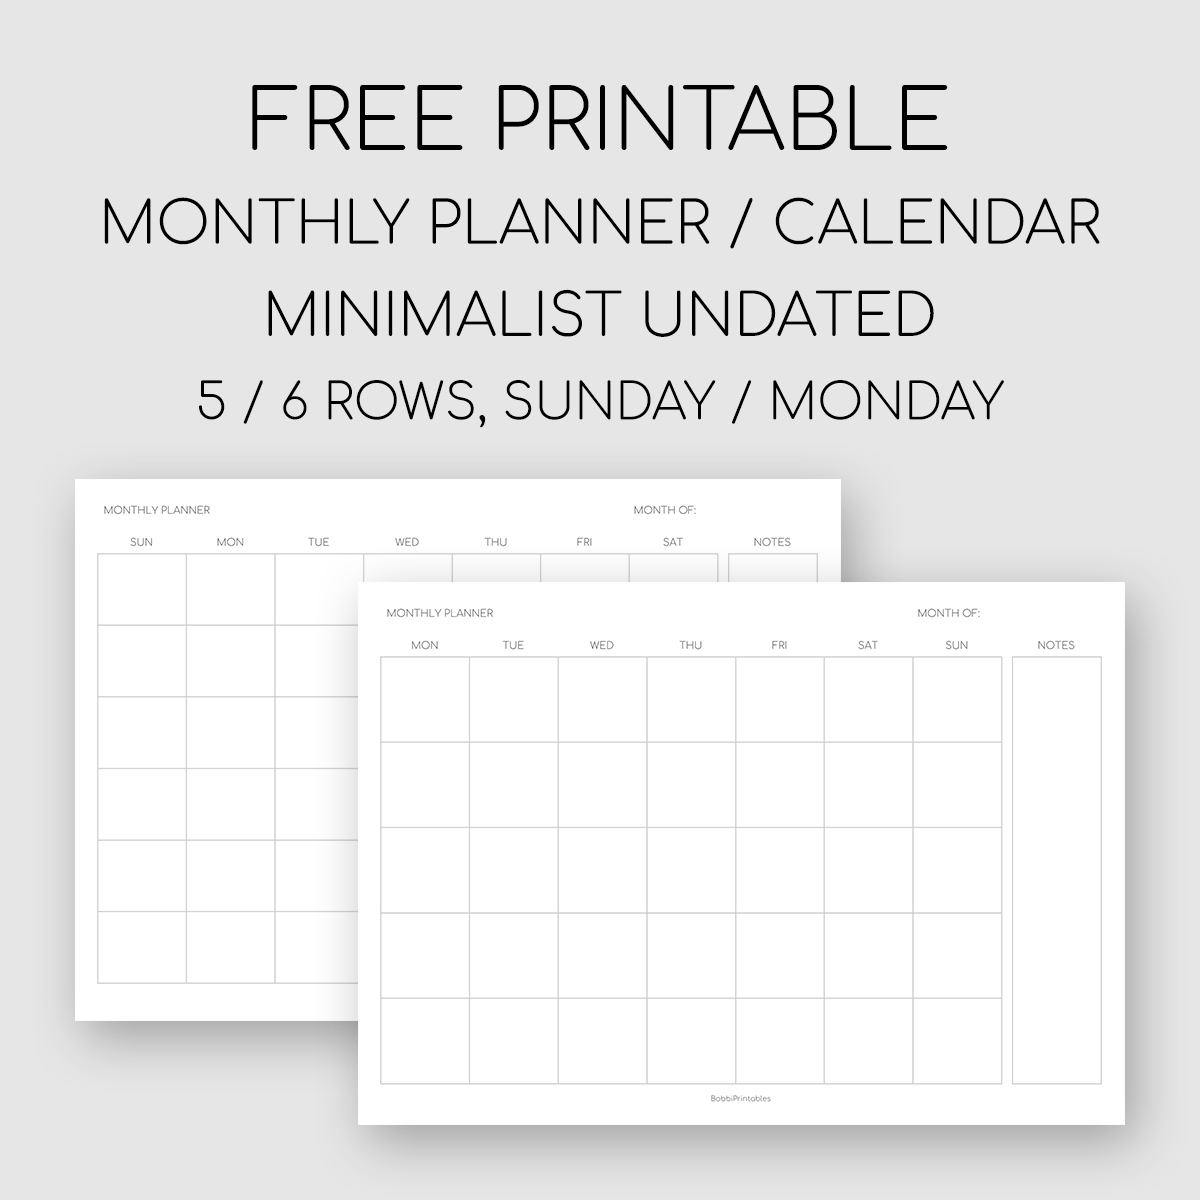 Bobbiprintables — Free Printable Minimalist Monthly Planner / throughout Free Printable Undated Monthly Calendar